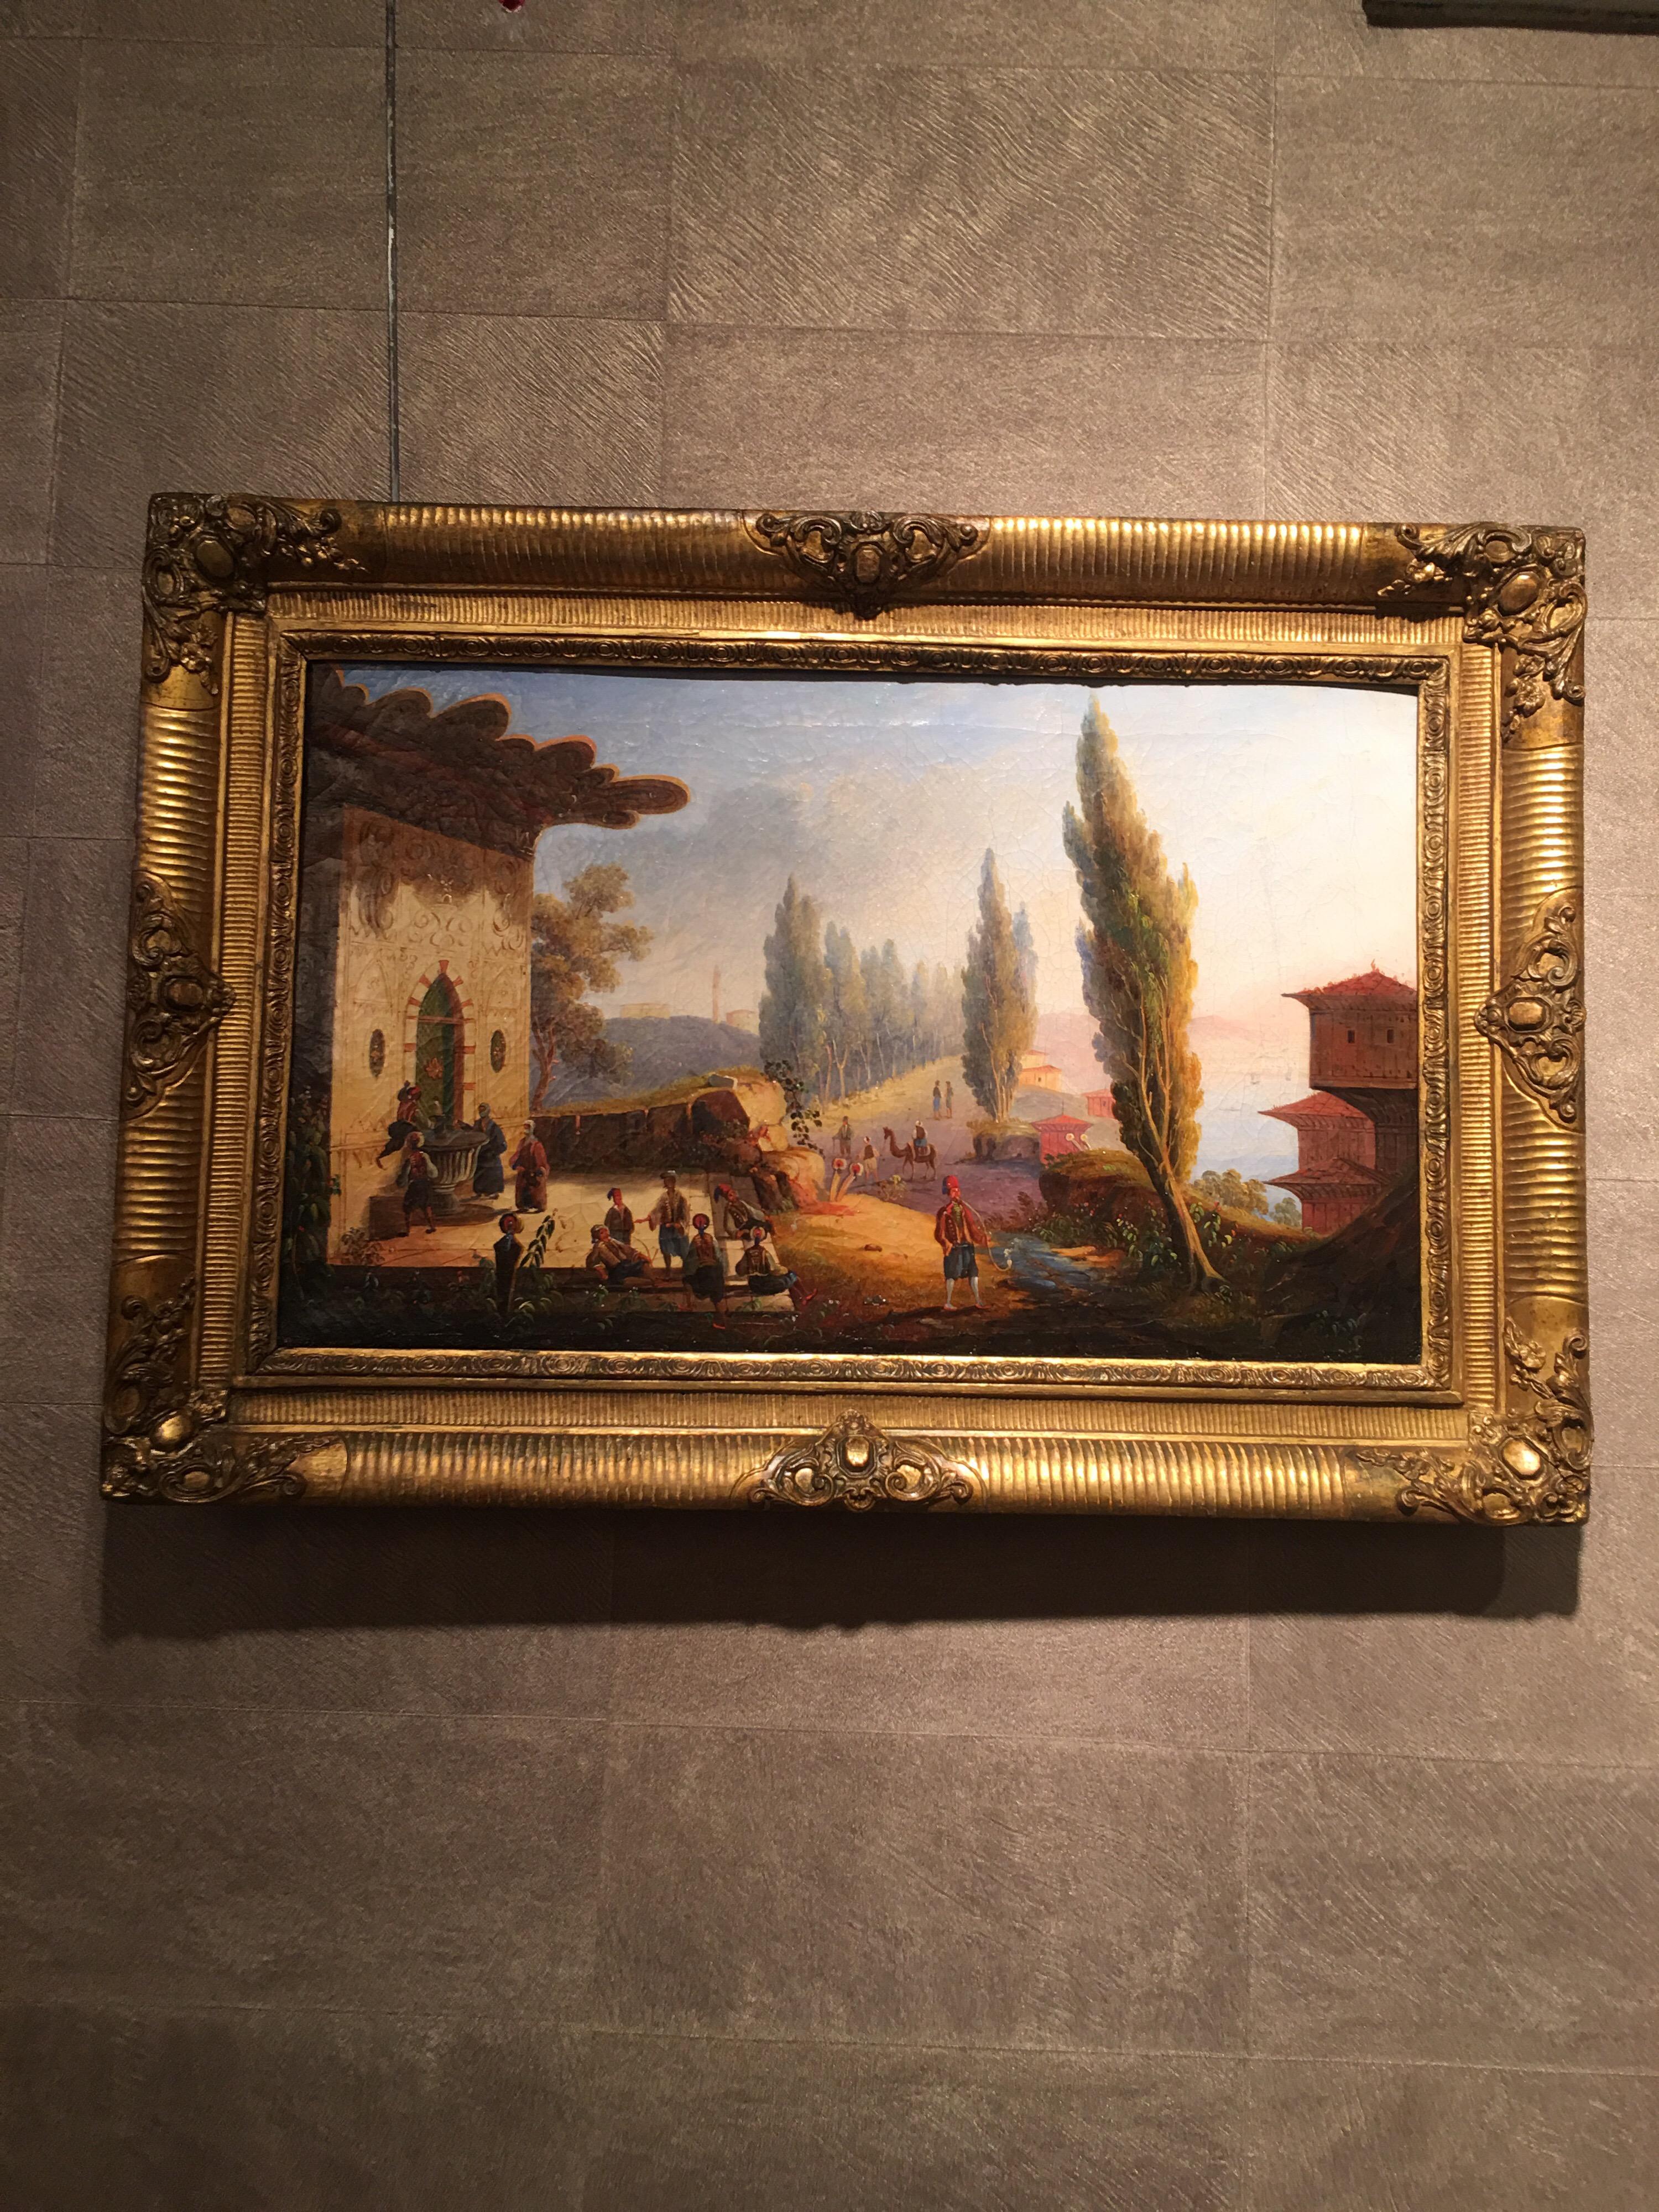 19th century Orientalist painting. French school.
Oil on canvas with frame from same period.
The painting is in excellent overall condition.
A past repair is visible on the back of the canvas.
The golden wood and plaster frame is from the